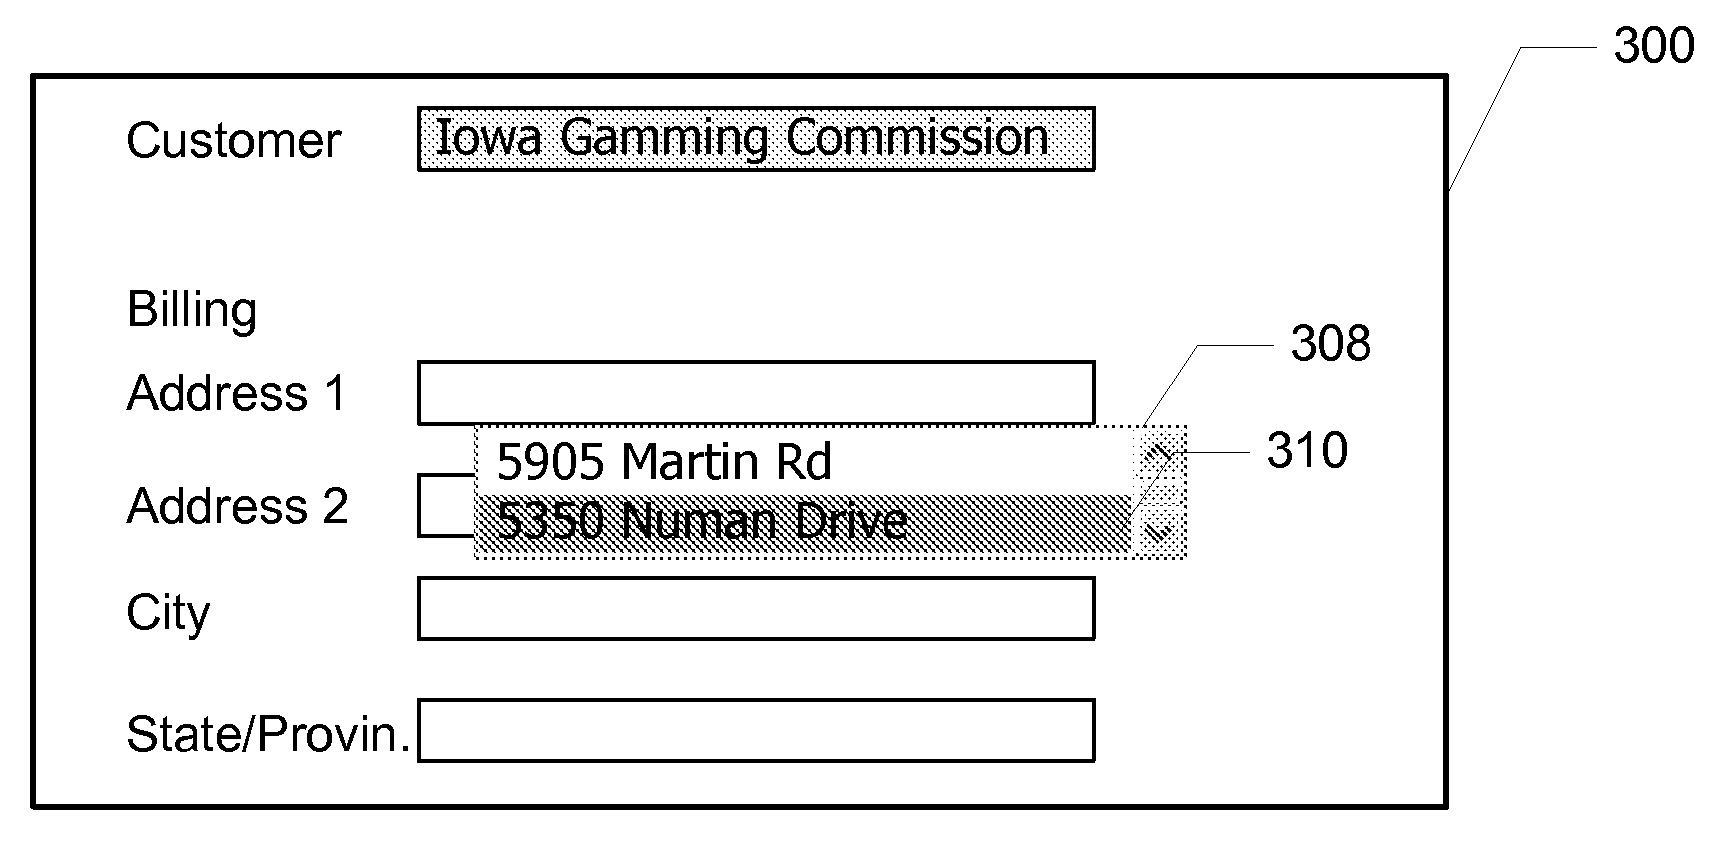 System and method for providing a context-sensitive user interface